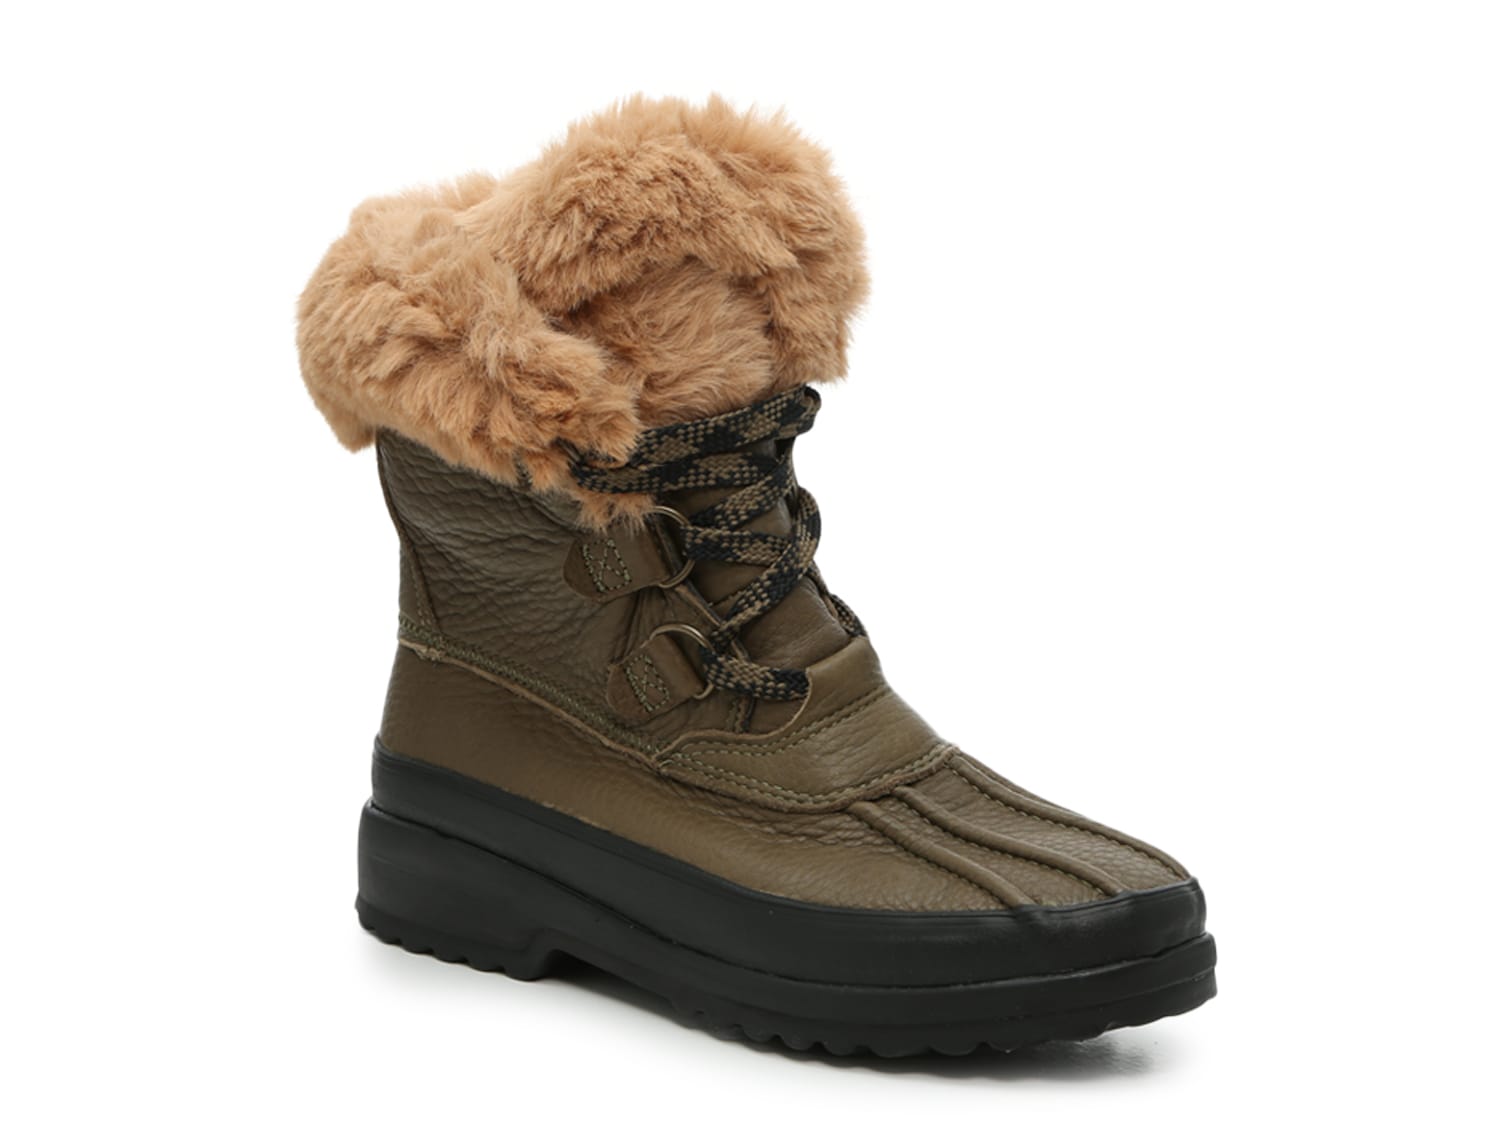 Sperry Maritime Snow Boot - Free Shipping | DSW